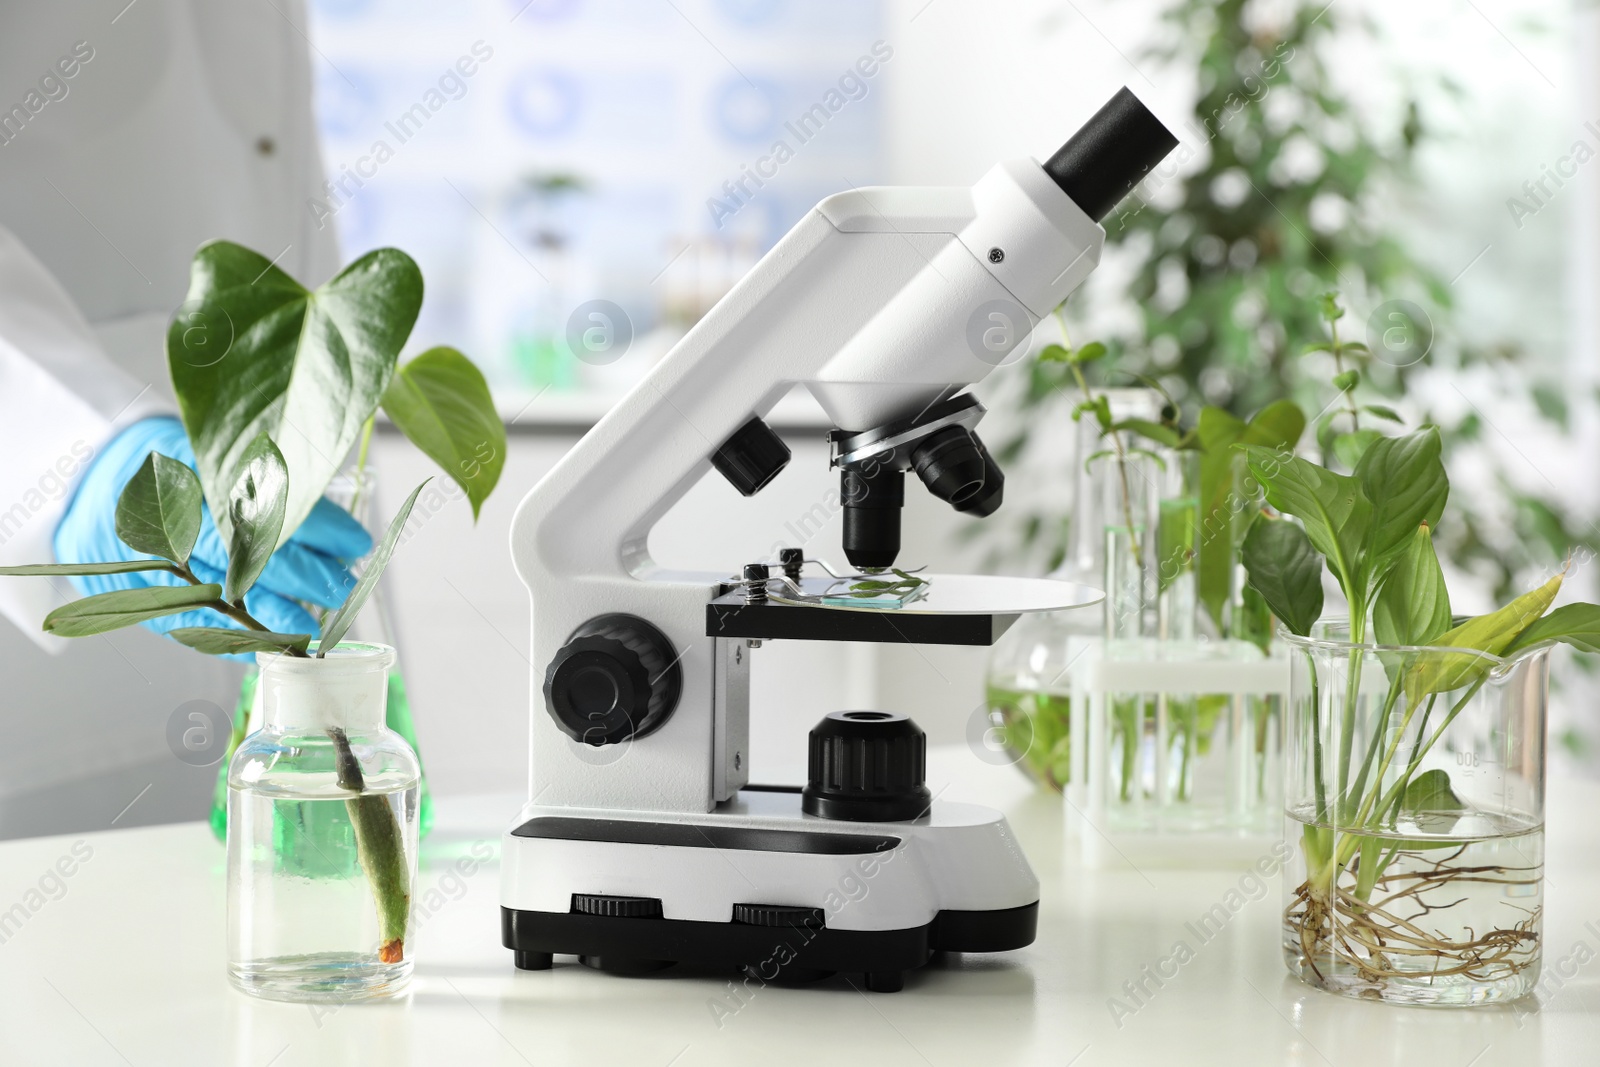 Photo of Laboratory glassware with plants and microscope on table. Biological chemistry